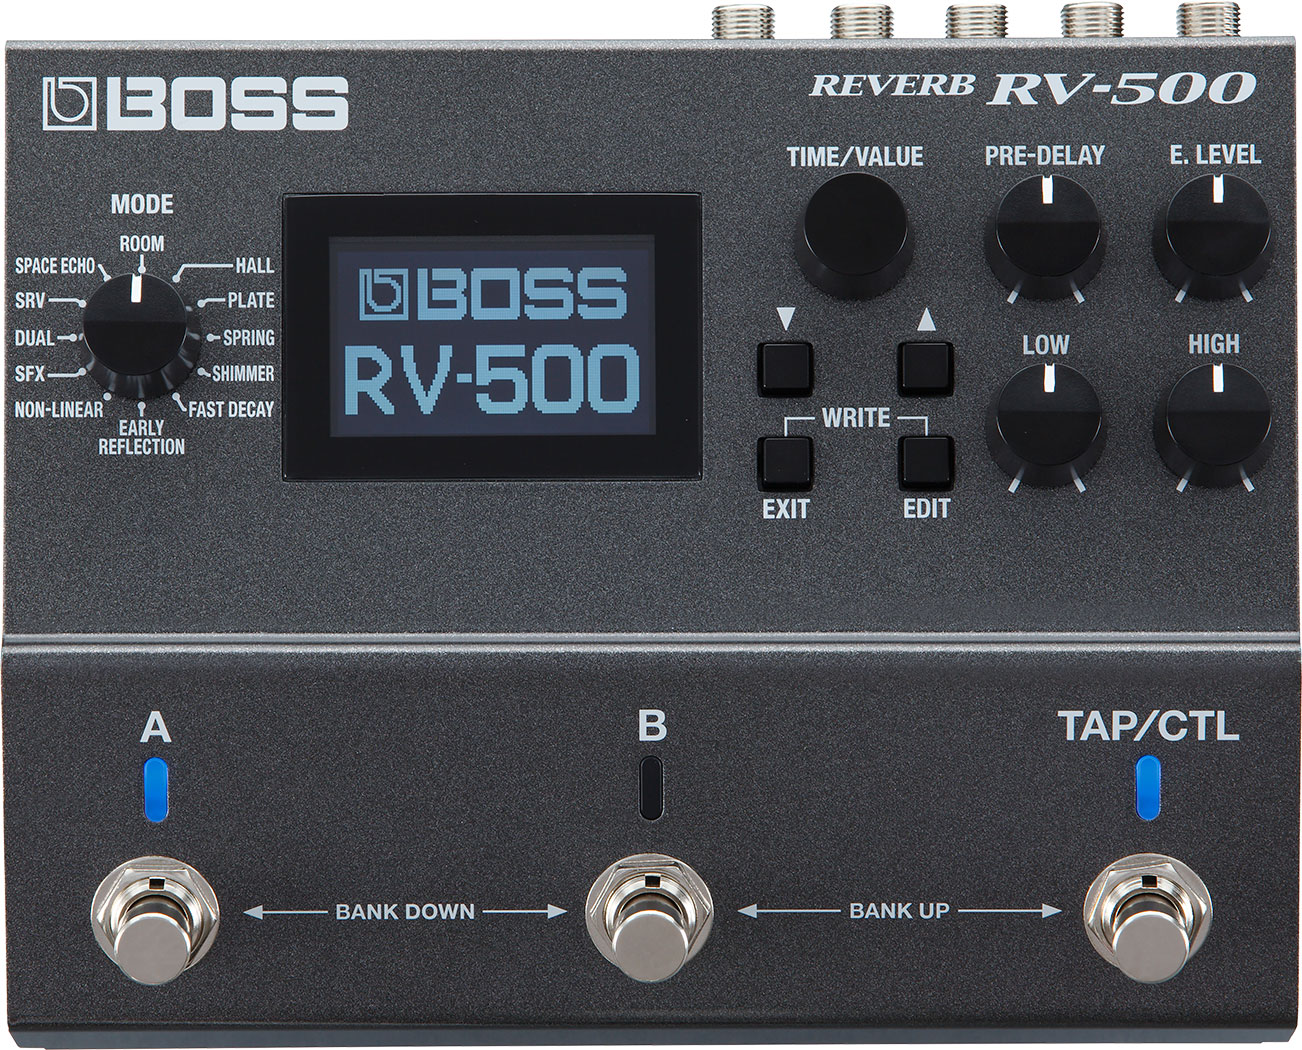 Boss Rv-500 Reverb - Reverb, delay & echo effect pedal - Main picture